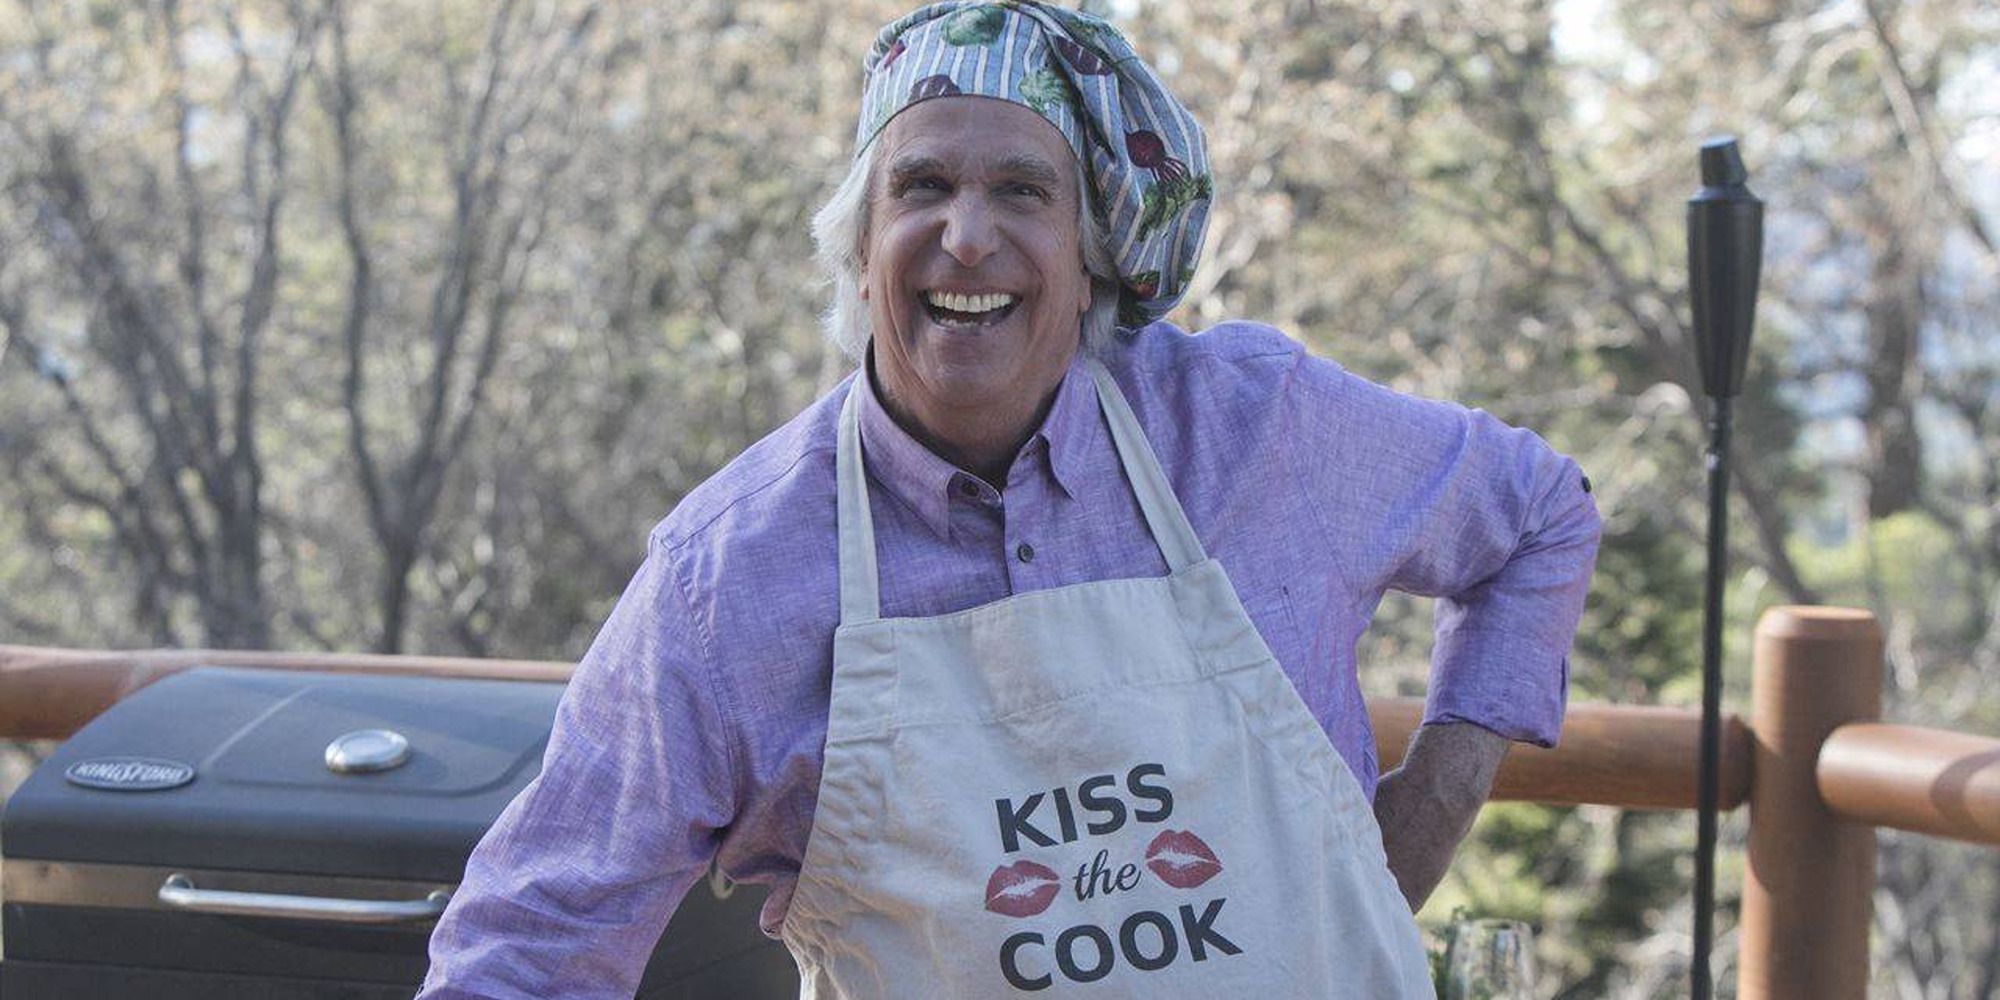 Henry Winkler as Gene Cousineau 'Barry' Season 1, with a cooking hat and apron in front of a grill